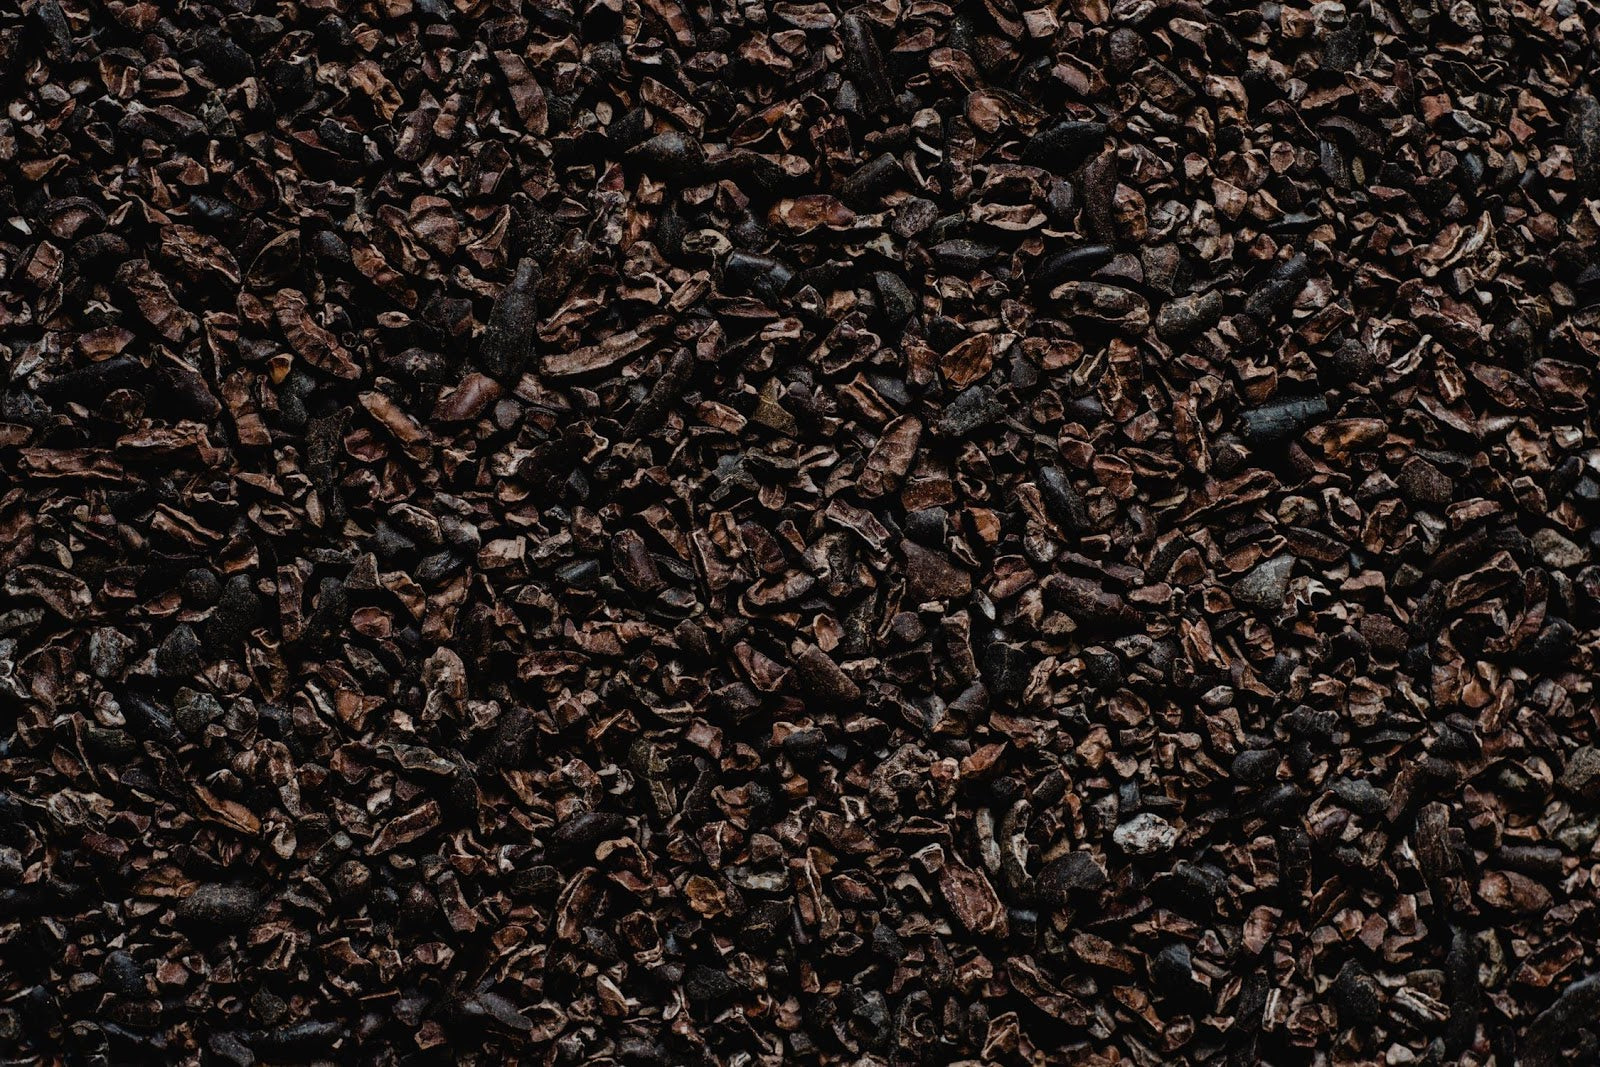 Cacao Nibs: 5 Ways to Enjoy the Low-Key Superfood